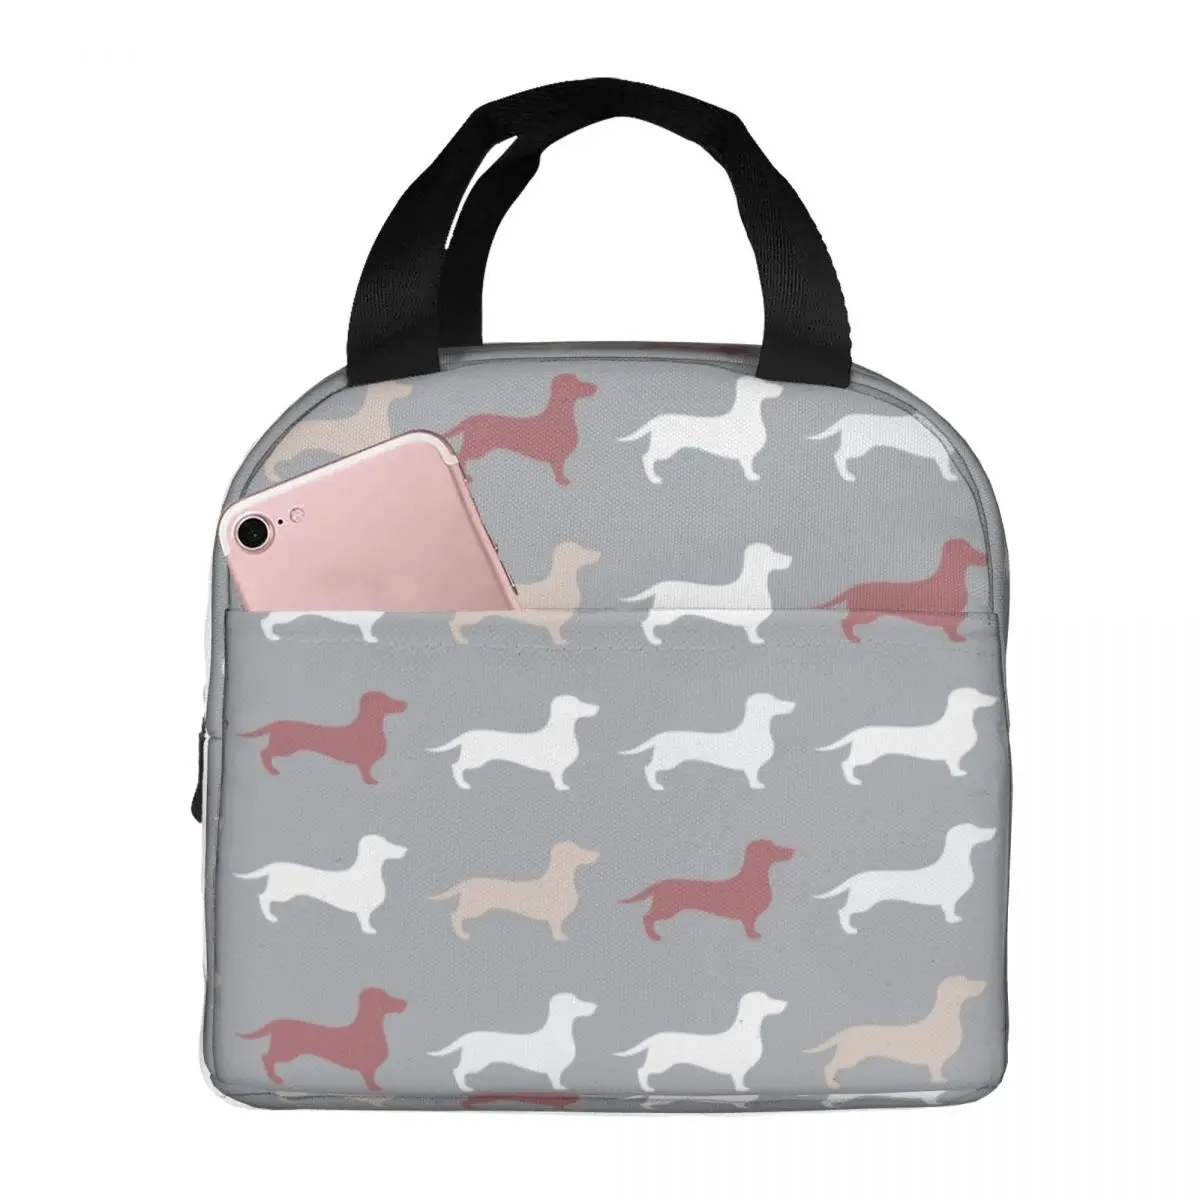 Dachshund Dog Lunch Bags Portable Insulated Canvas Cooler Bag Thermal Picnic Work Lunch Box for Women Children